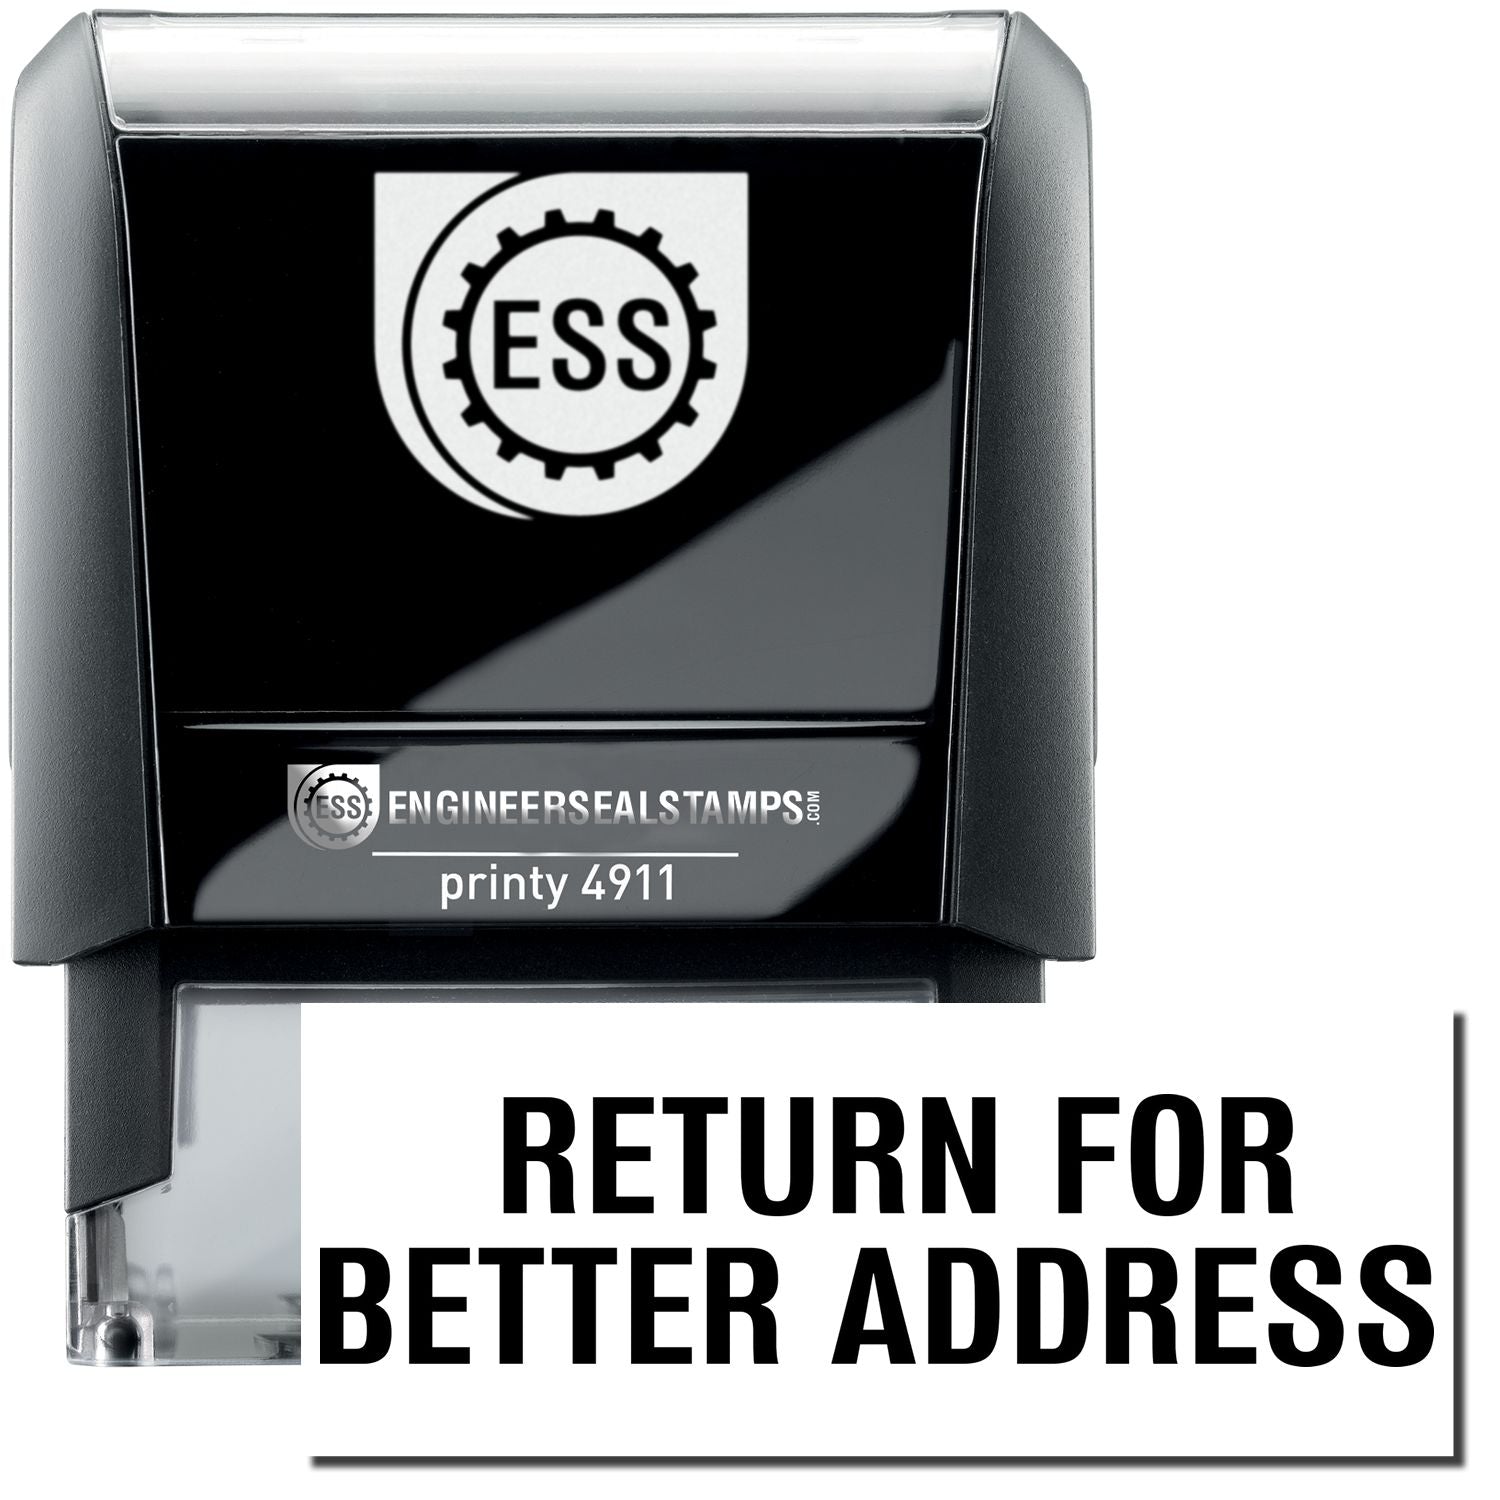 A self-inking stamp with a stamped image showing how the text "RETURN FOR BETTER ADDRESS" is displayed after stamping.